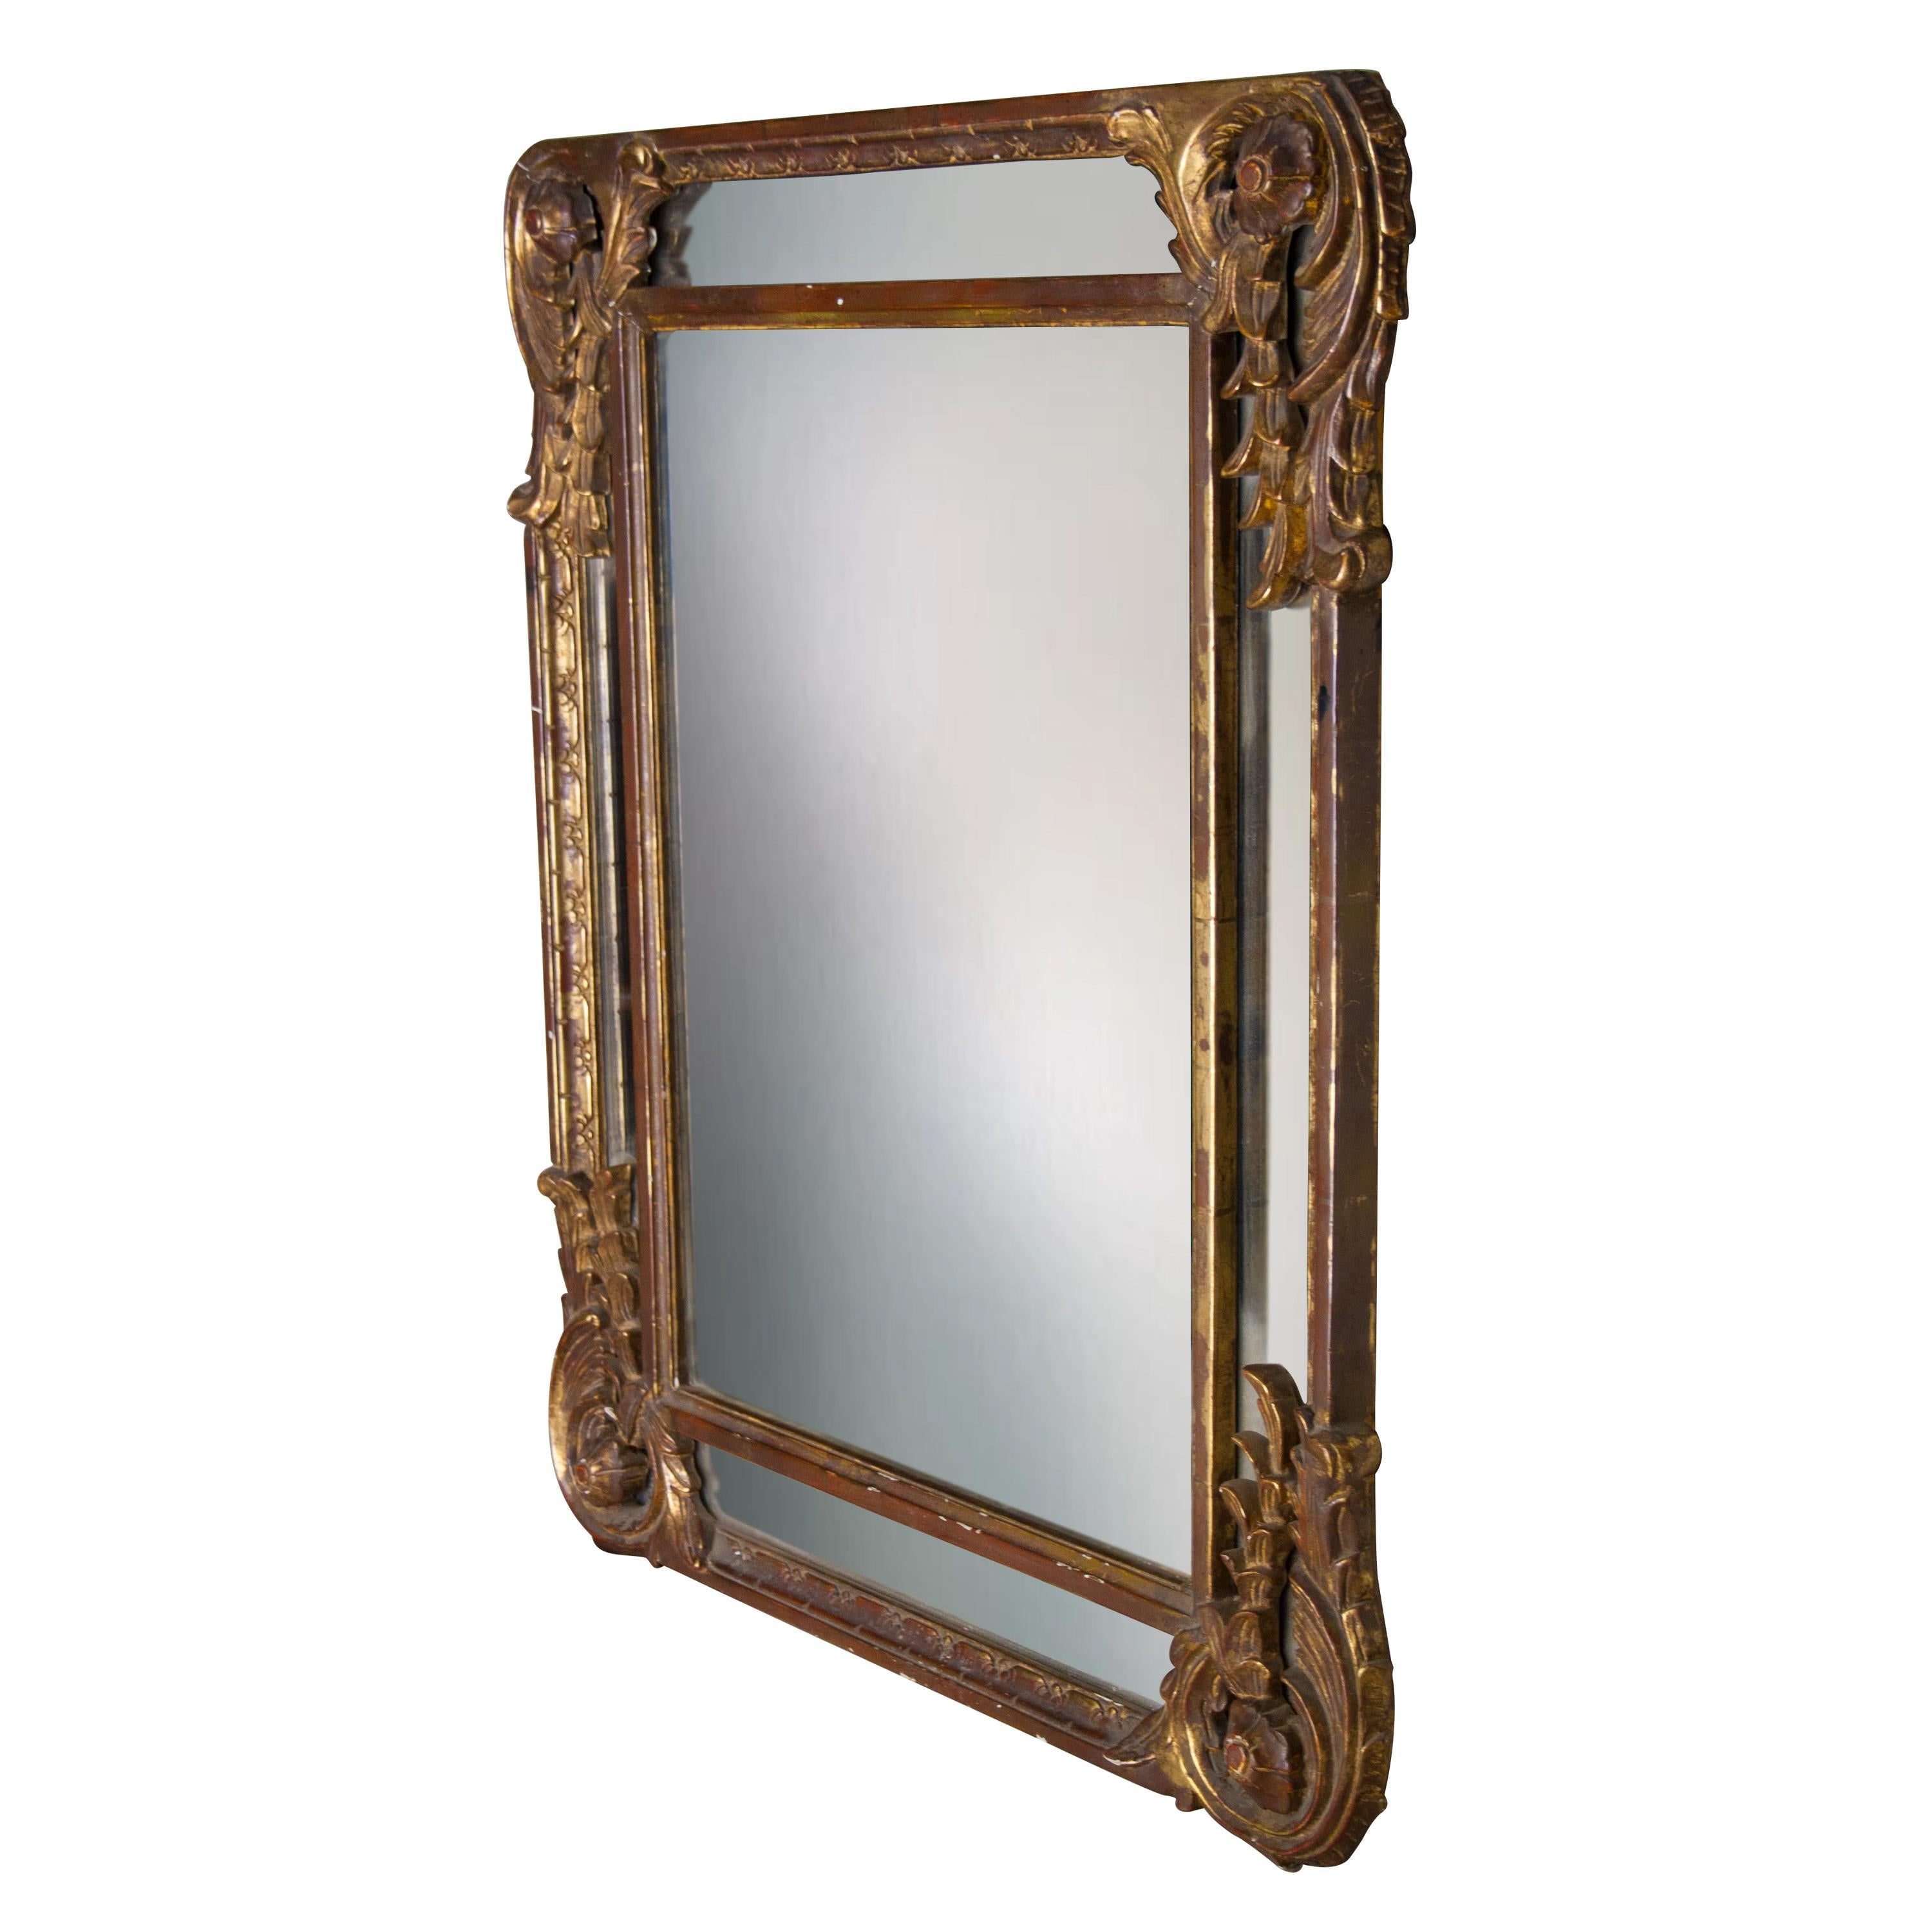 Neoclassical rectangular handcrafted mirror. Rectangular hand carved wooden structure with gold foil finished, Spain, 1970.